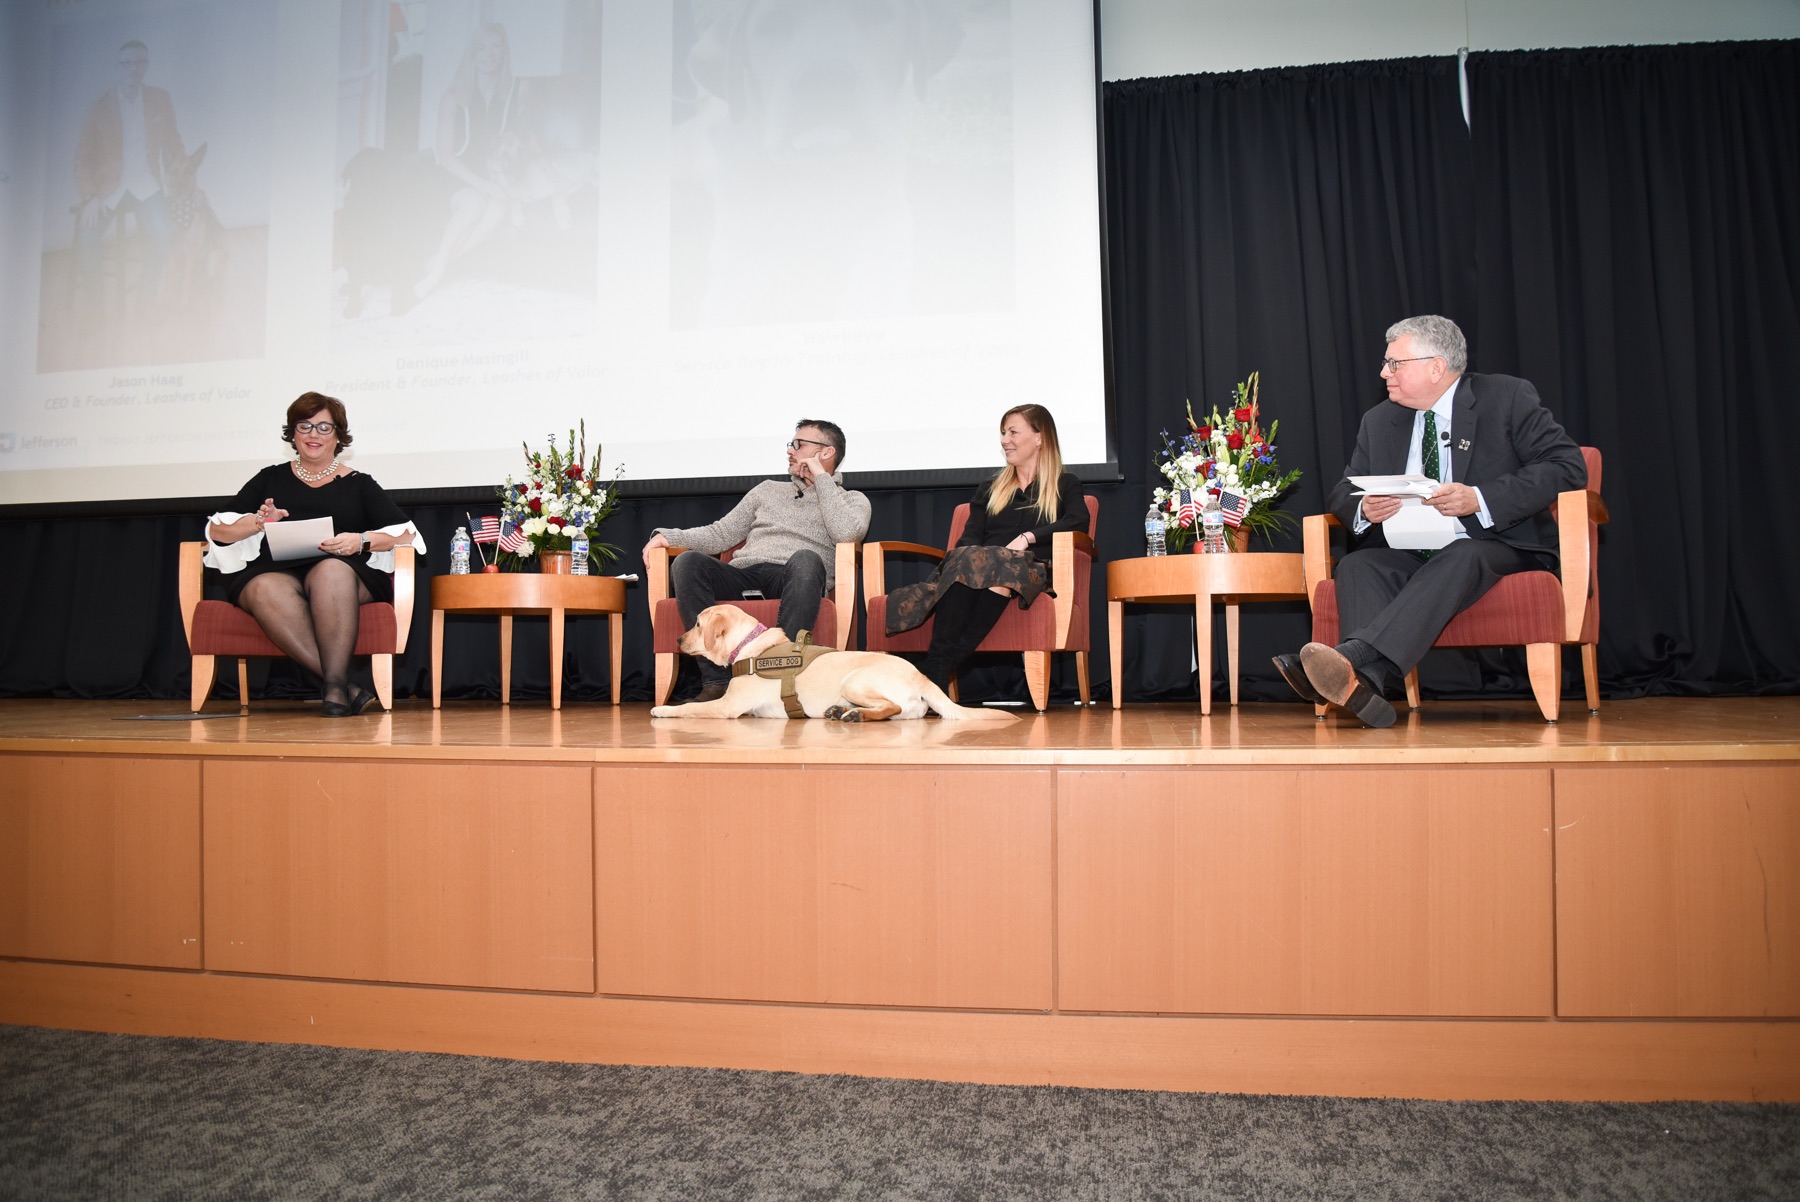 Panelists sit on stage with the dog Maggie on the ground